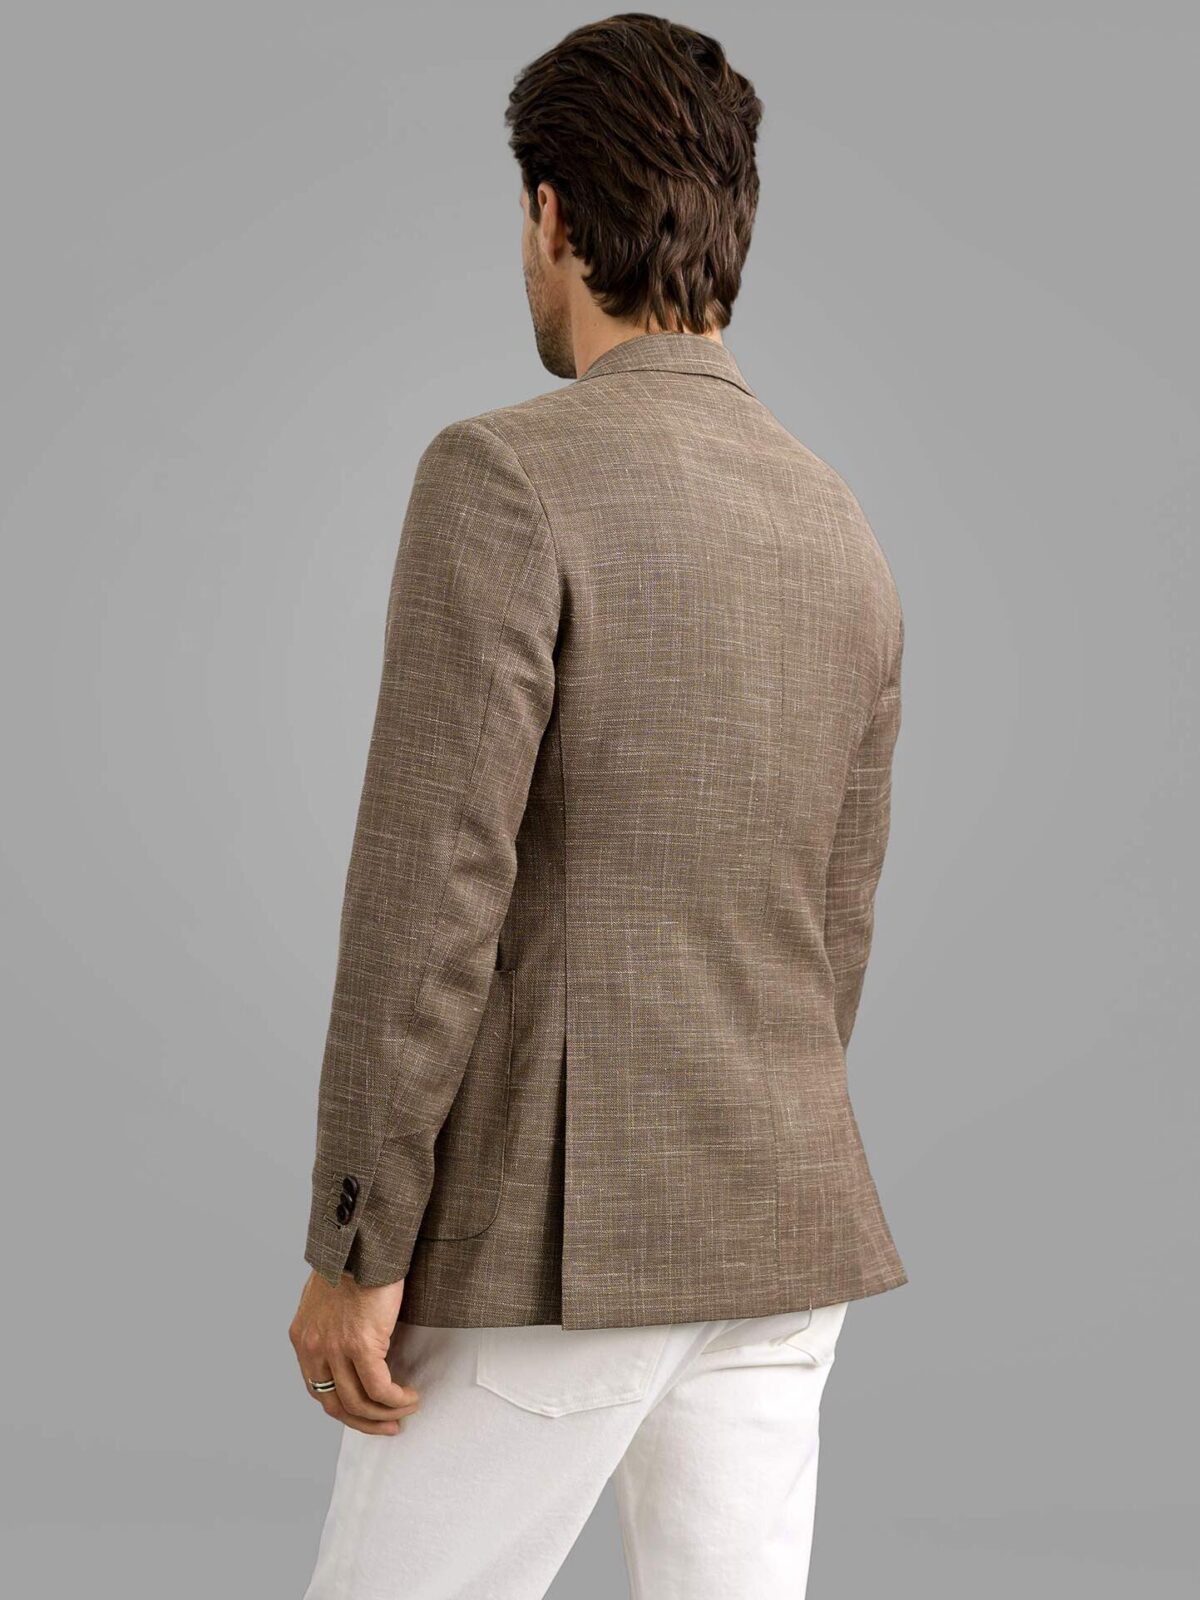 Mocha Wool and Linen Stretch Fit Clothing - Jacket Bedford Tailored Custom